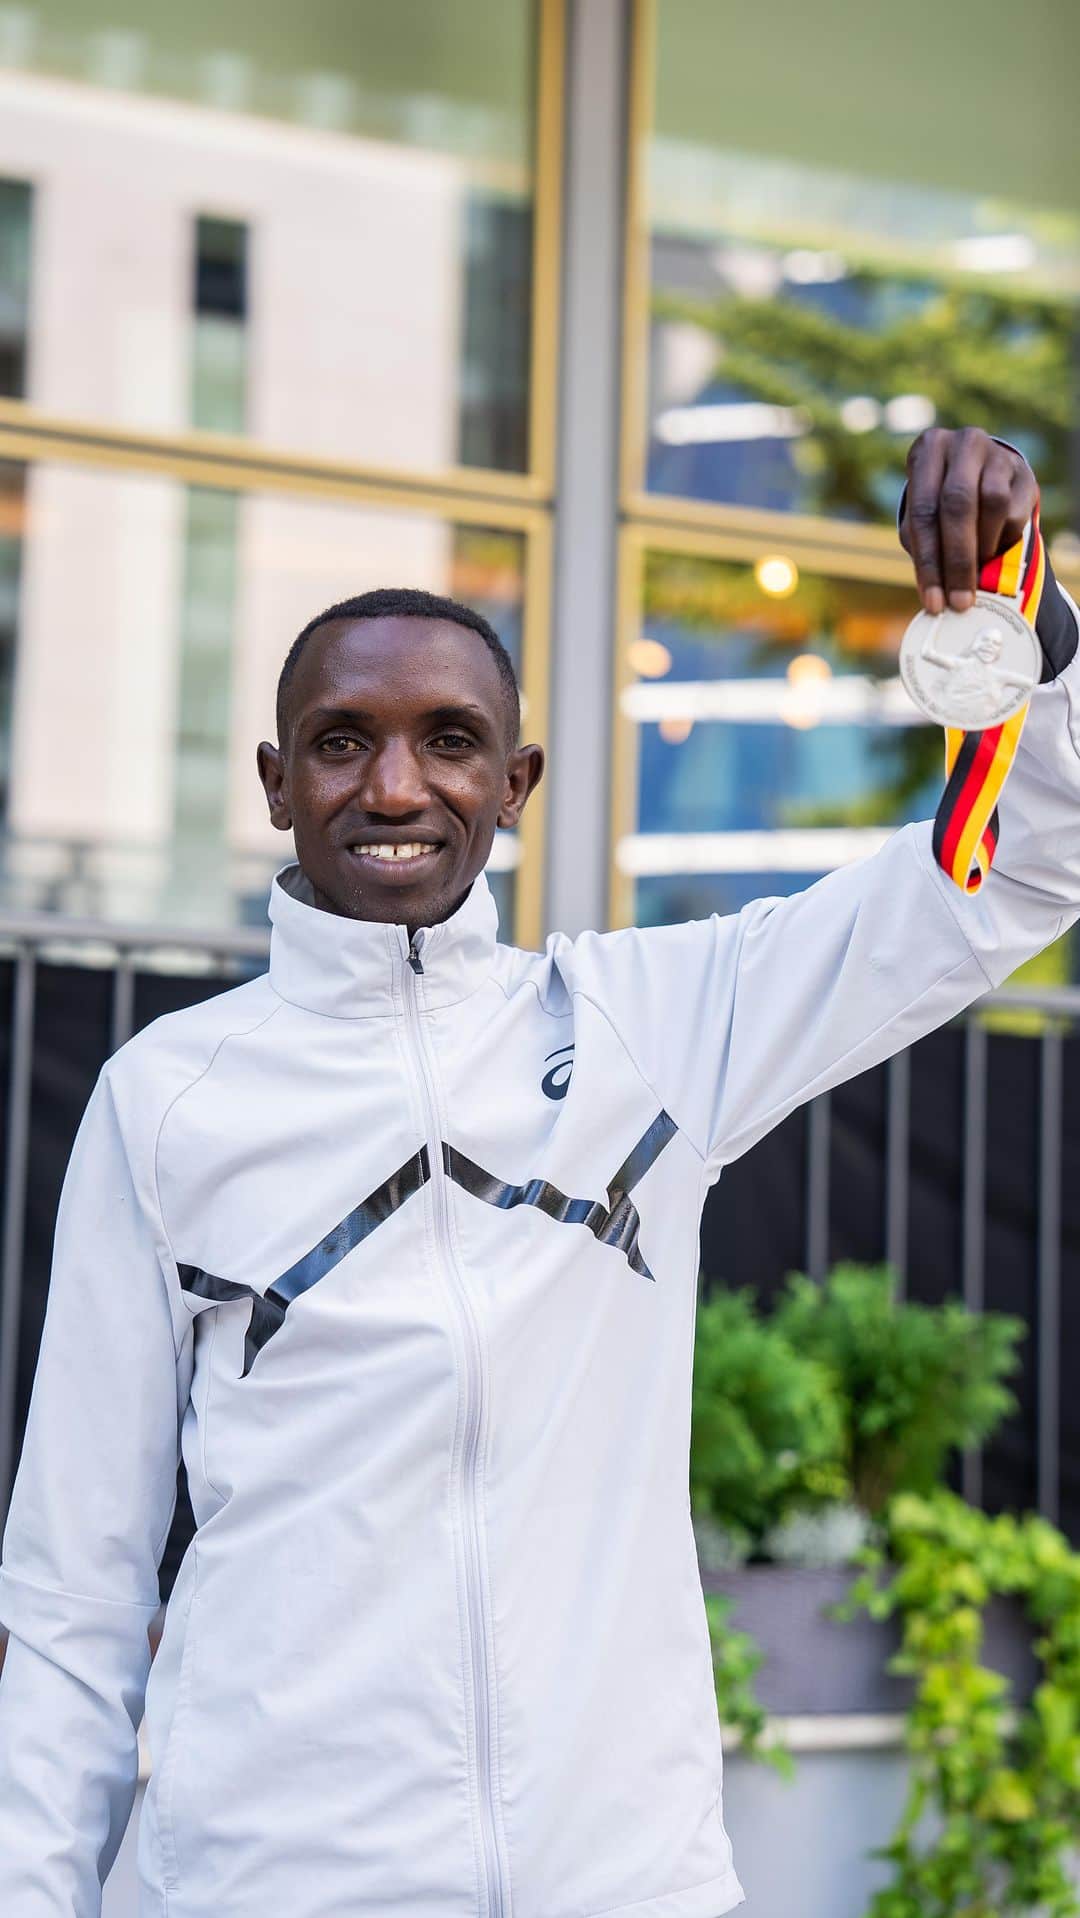 ASICS Americaのインスタグラム：「@vincentngetichkipkemoi ran 02:03:13 for second place during his FIRST MARATHON EVER.  Watch @simonboch94 and Kipkemoi discuss his amazing marathon debut in Berlin. 🇩🇪」